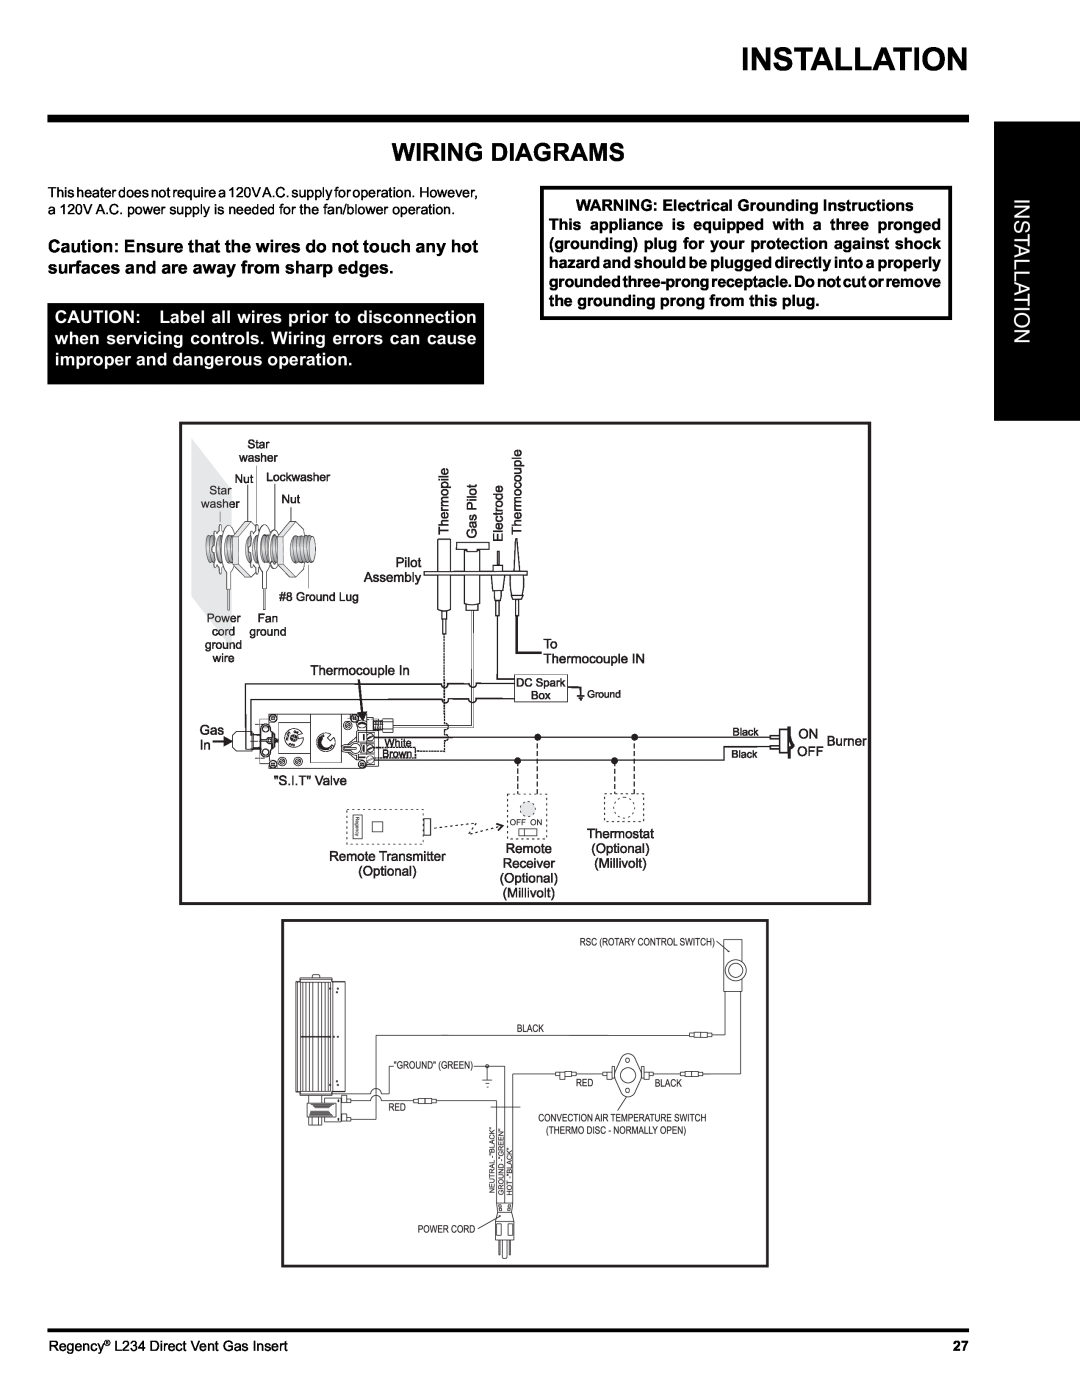 Regency L234-NG, L234-LP installation manual Installation, Wiring Diagrams, WARNING Electrical Grounding Instructions 